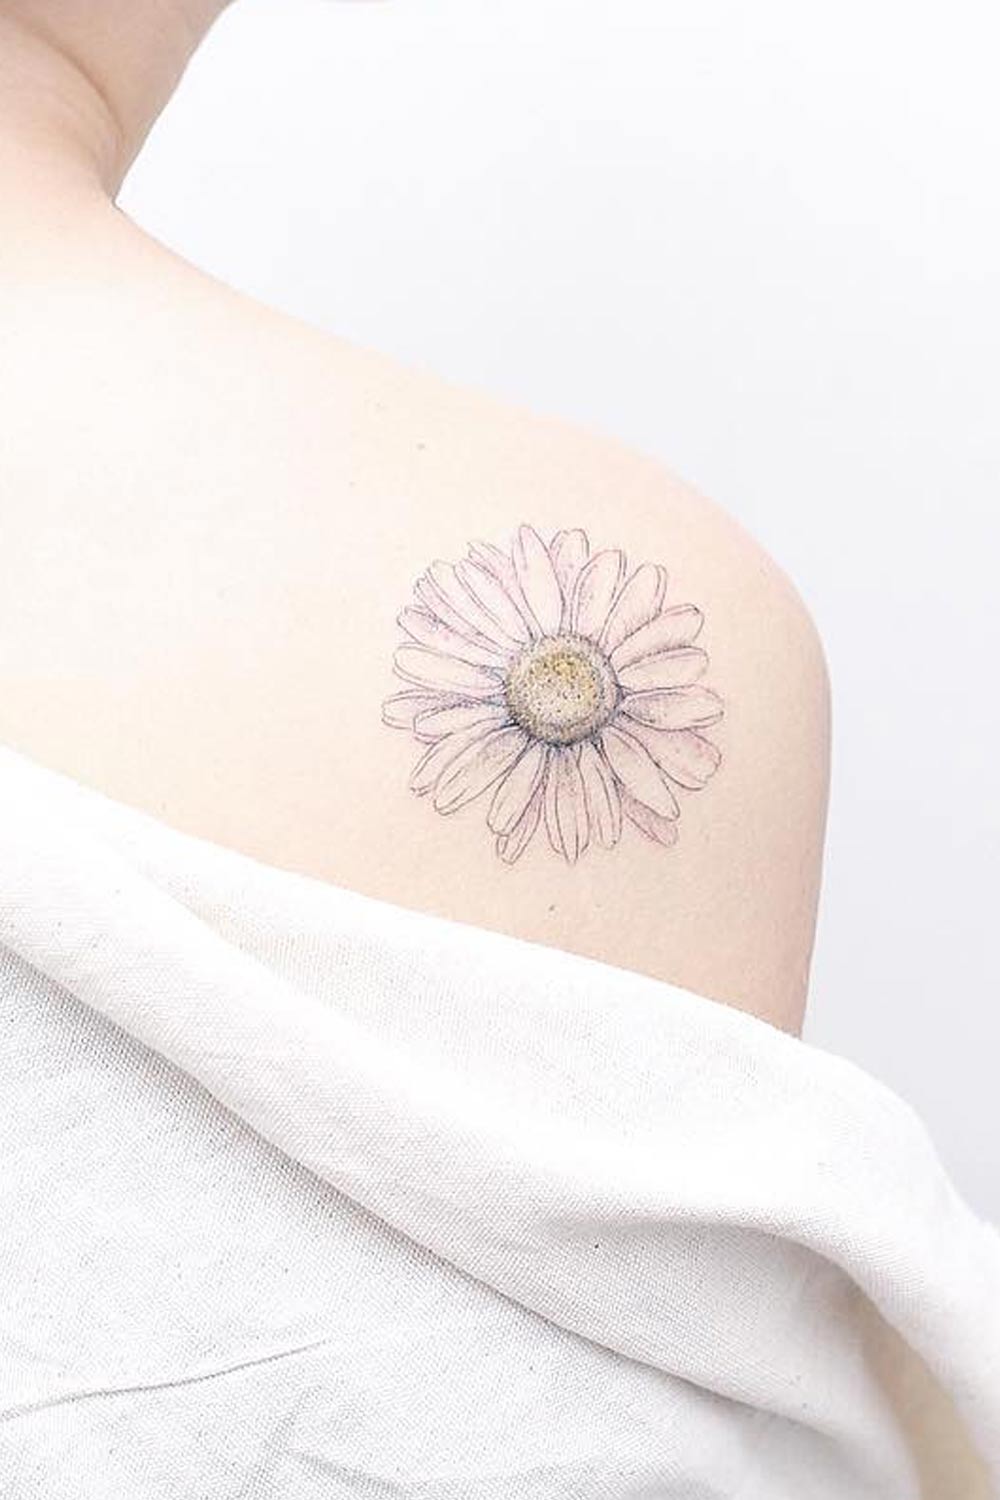 How Much Does a Daisy Tattoo Cost?